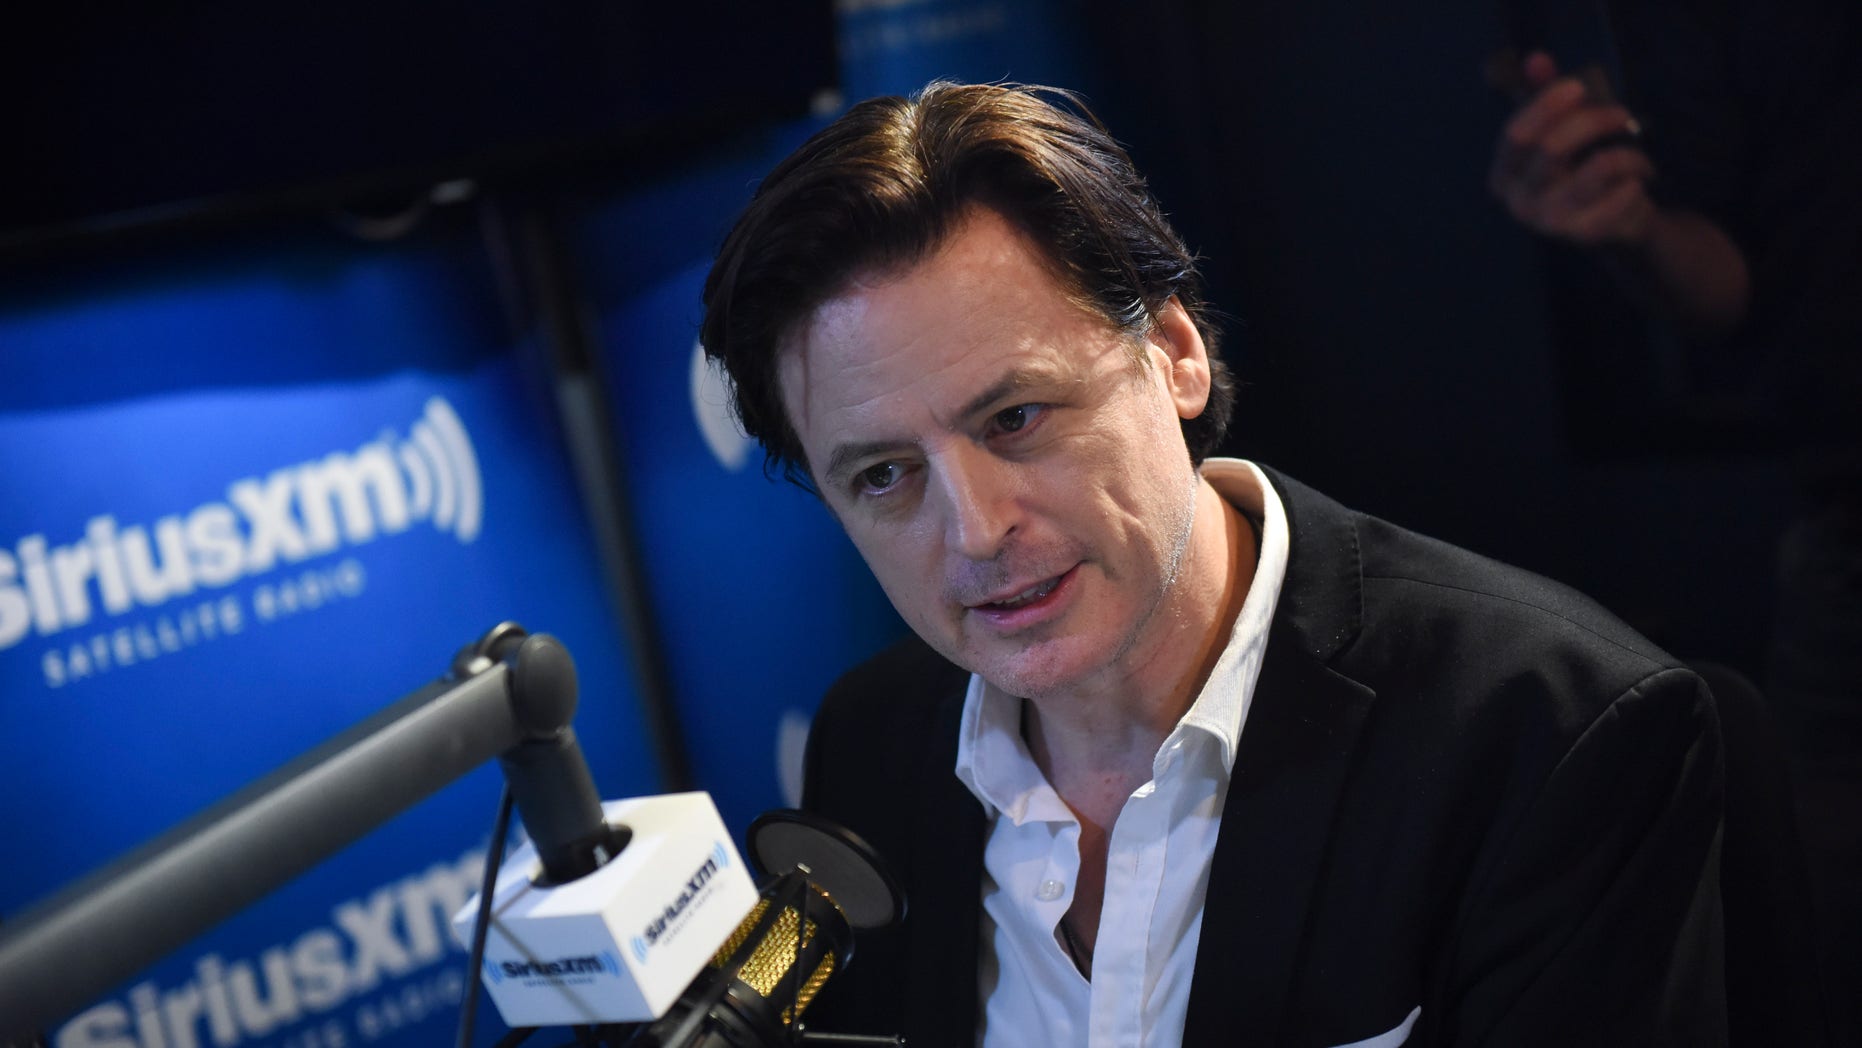 Actor John Fugelsang condemns Christian Trump supporters as 